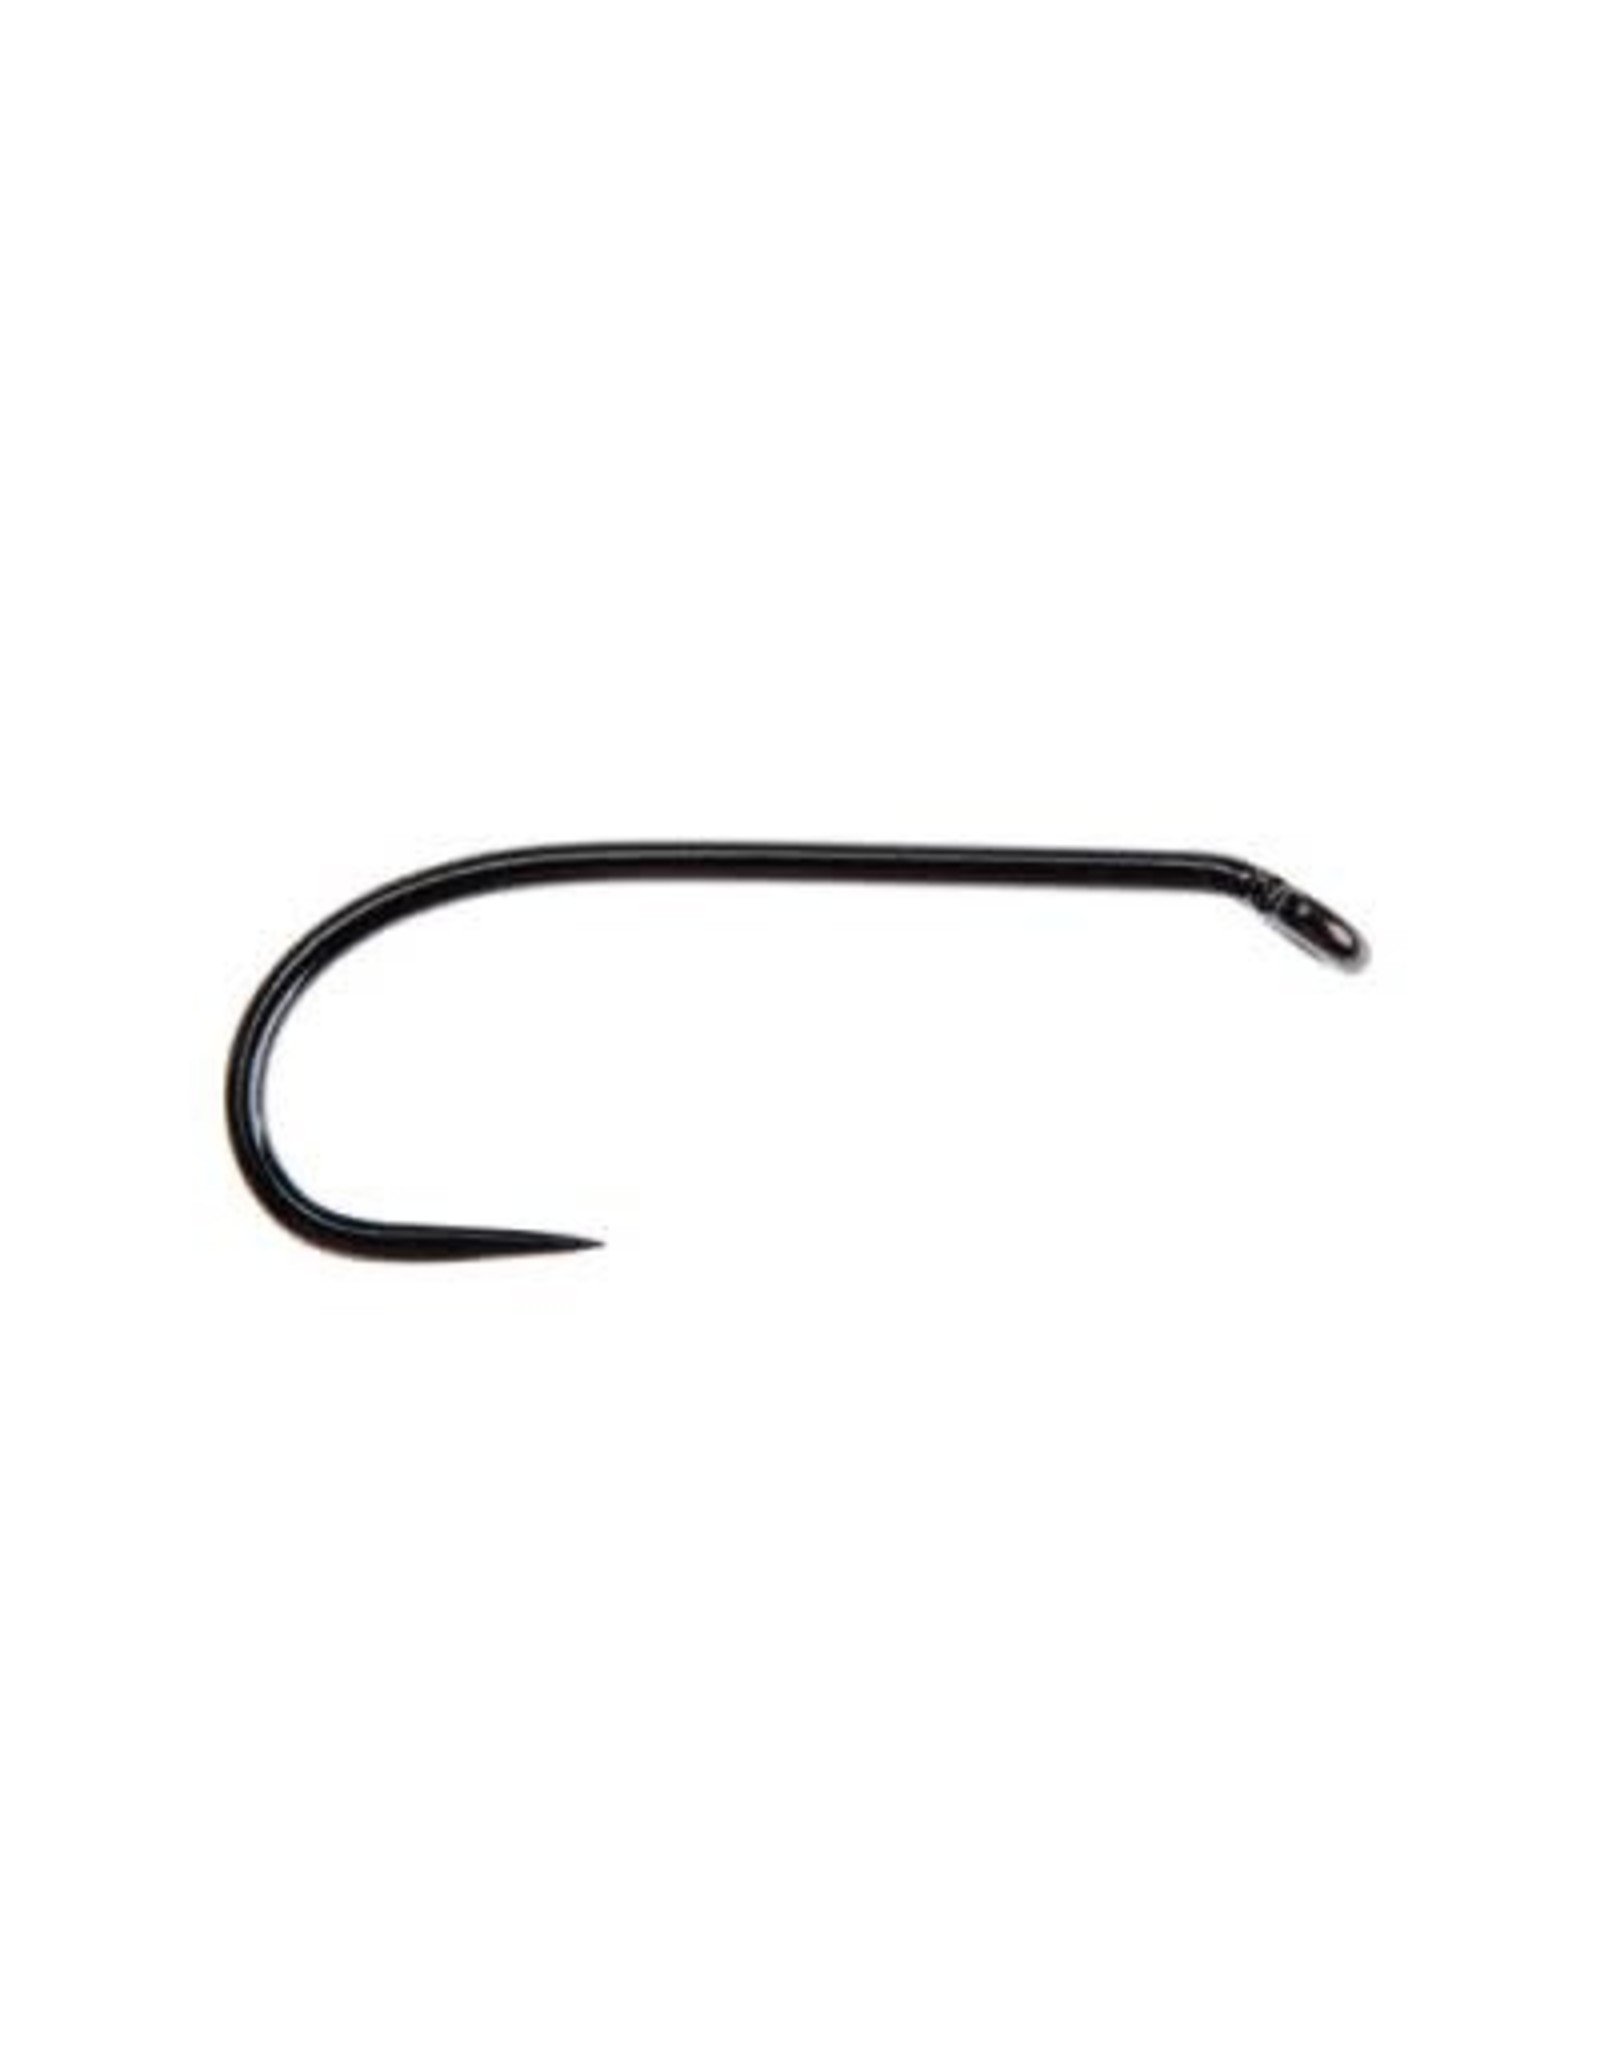 Ahrex Hooks AHREX FW561 #16 Nymph Traditional Barbless